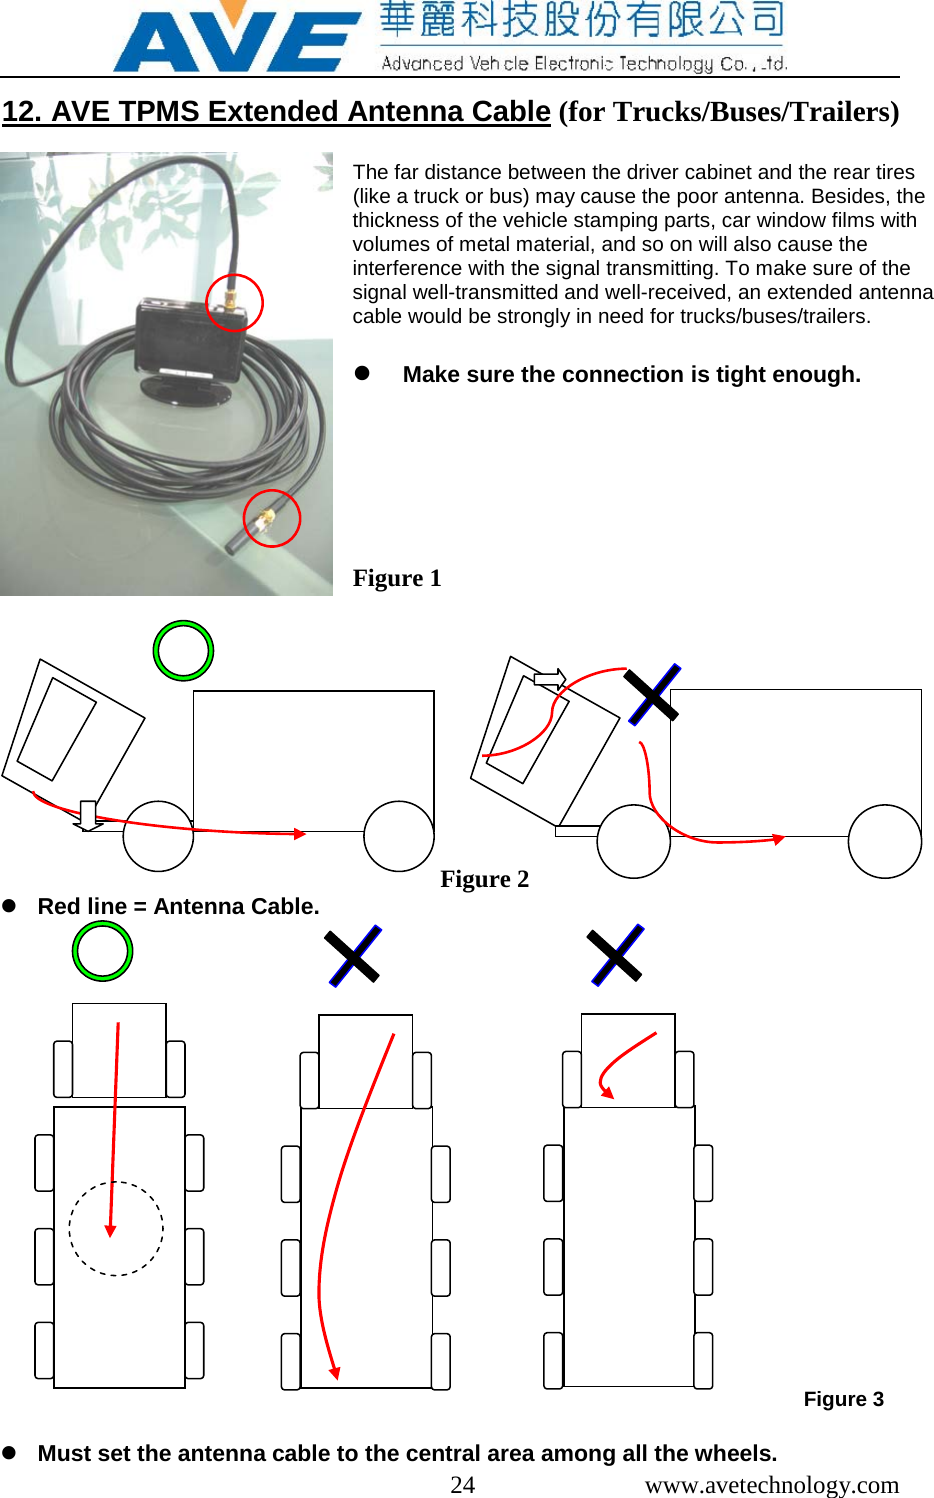  24  www.avetechnology.com  12. AVE TPMS Extended Antenna Cable (for Trucks/Buses/Trailers)                Figure 2  Red line = Antenna Cable. Figure 3   Must set the antenna cable to the central area among all the wheels.The far distance between the driver cabinet and the rear tires (like a truck or bus) may cause the poor antenna. Besides, the thickness of the vehicle stamping parts, car window films with volumes of metal material, and so on will also cause the interference with the signal transmitting. To make sure of the signal well-transmitted and well-received, an extended antenna cable would be strongly in need for trucks/buses/trailers.   Make sure the connection is tight enough. Figure 1 